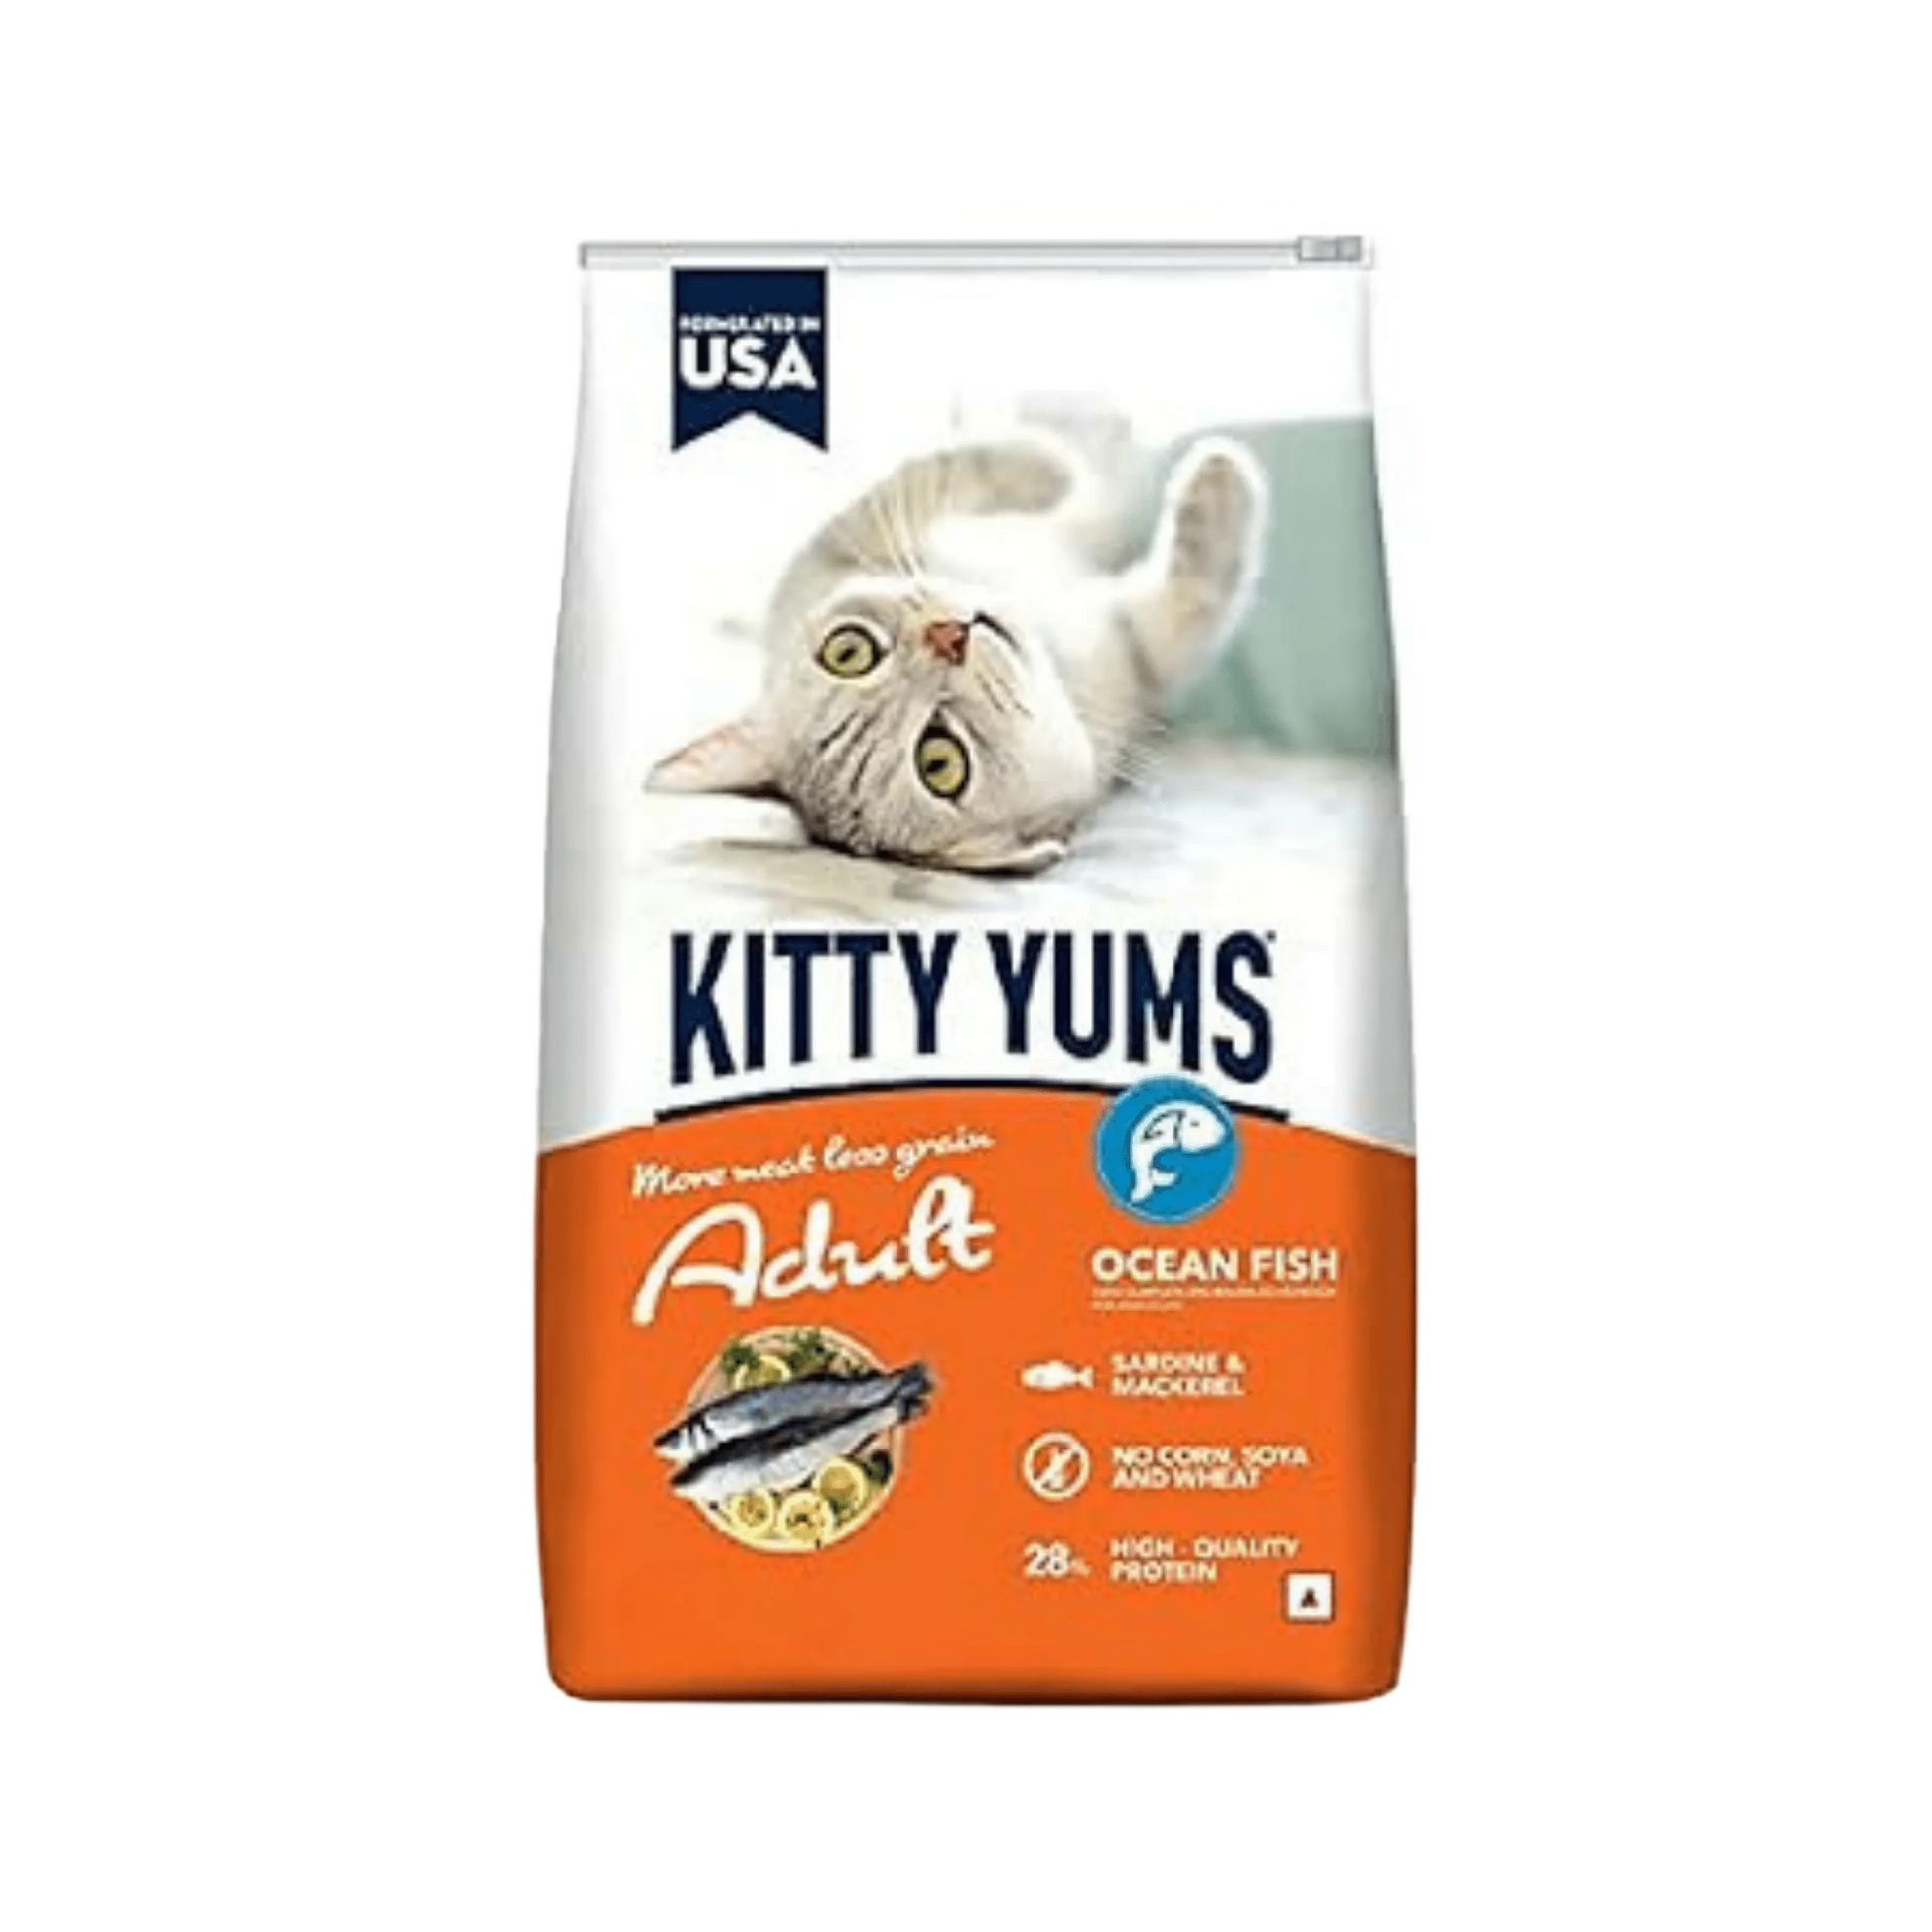 KITTY YUMS CAT ADULT DRY FOOD (L) - Animeal